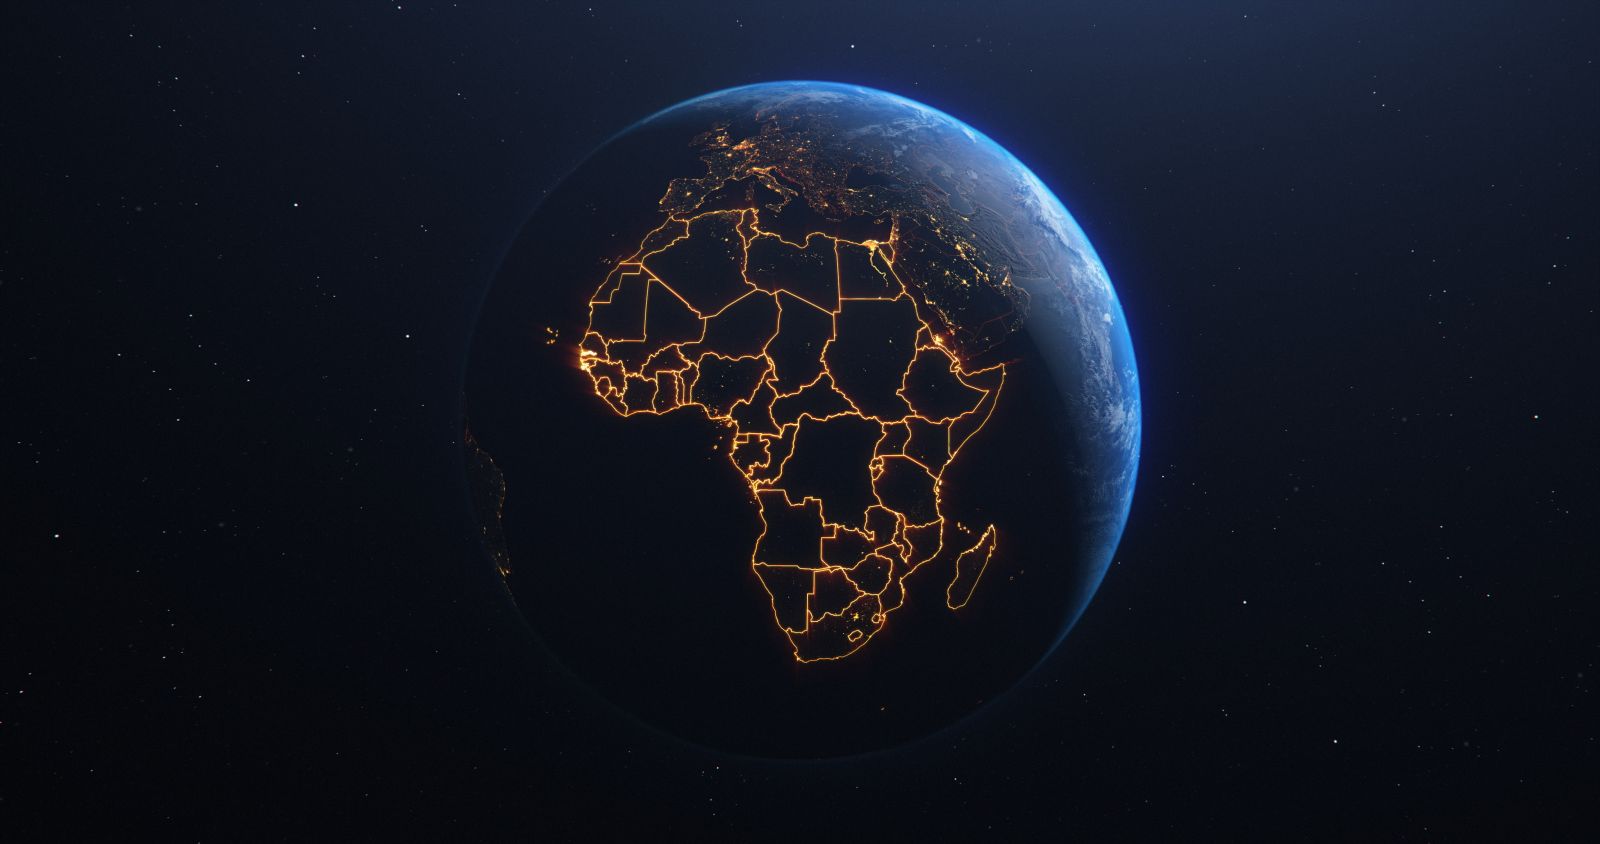 Image of a globe with the continent of Africa outlined in lights